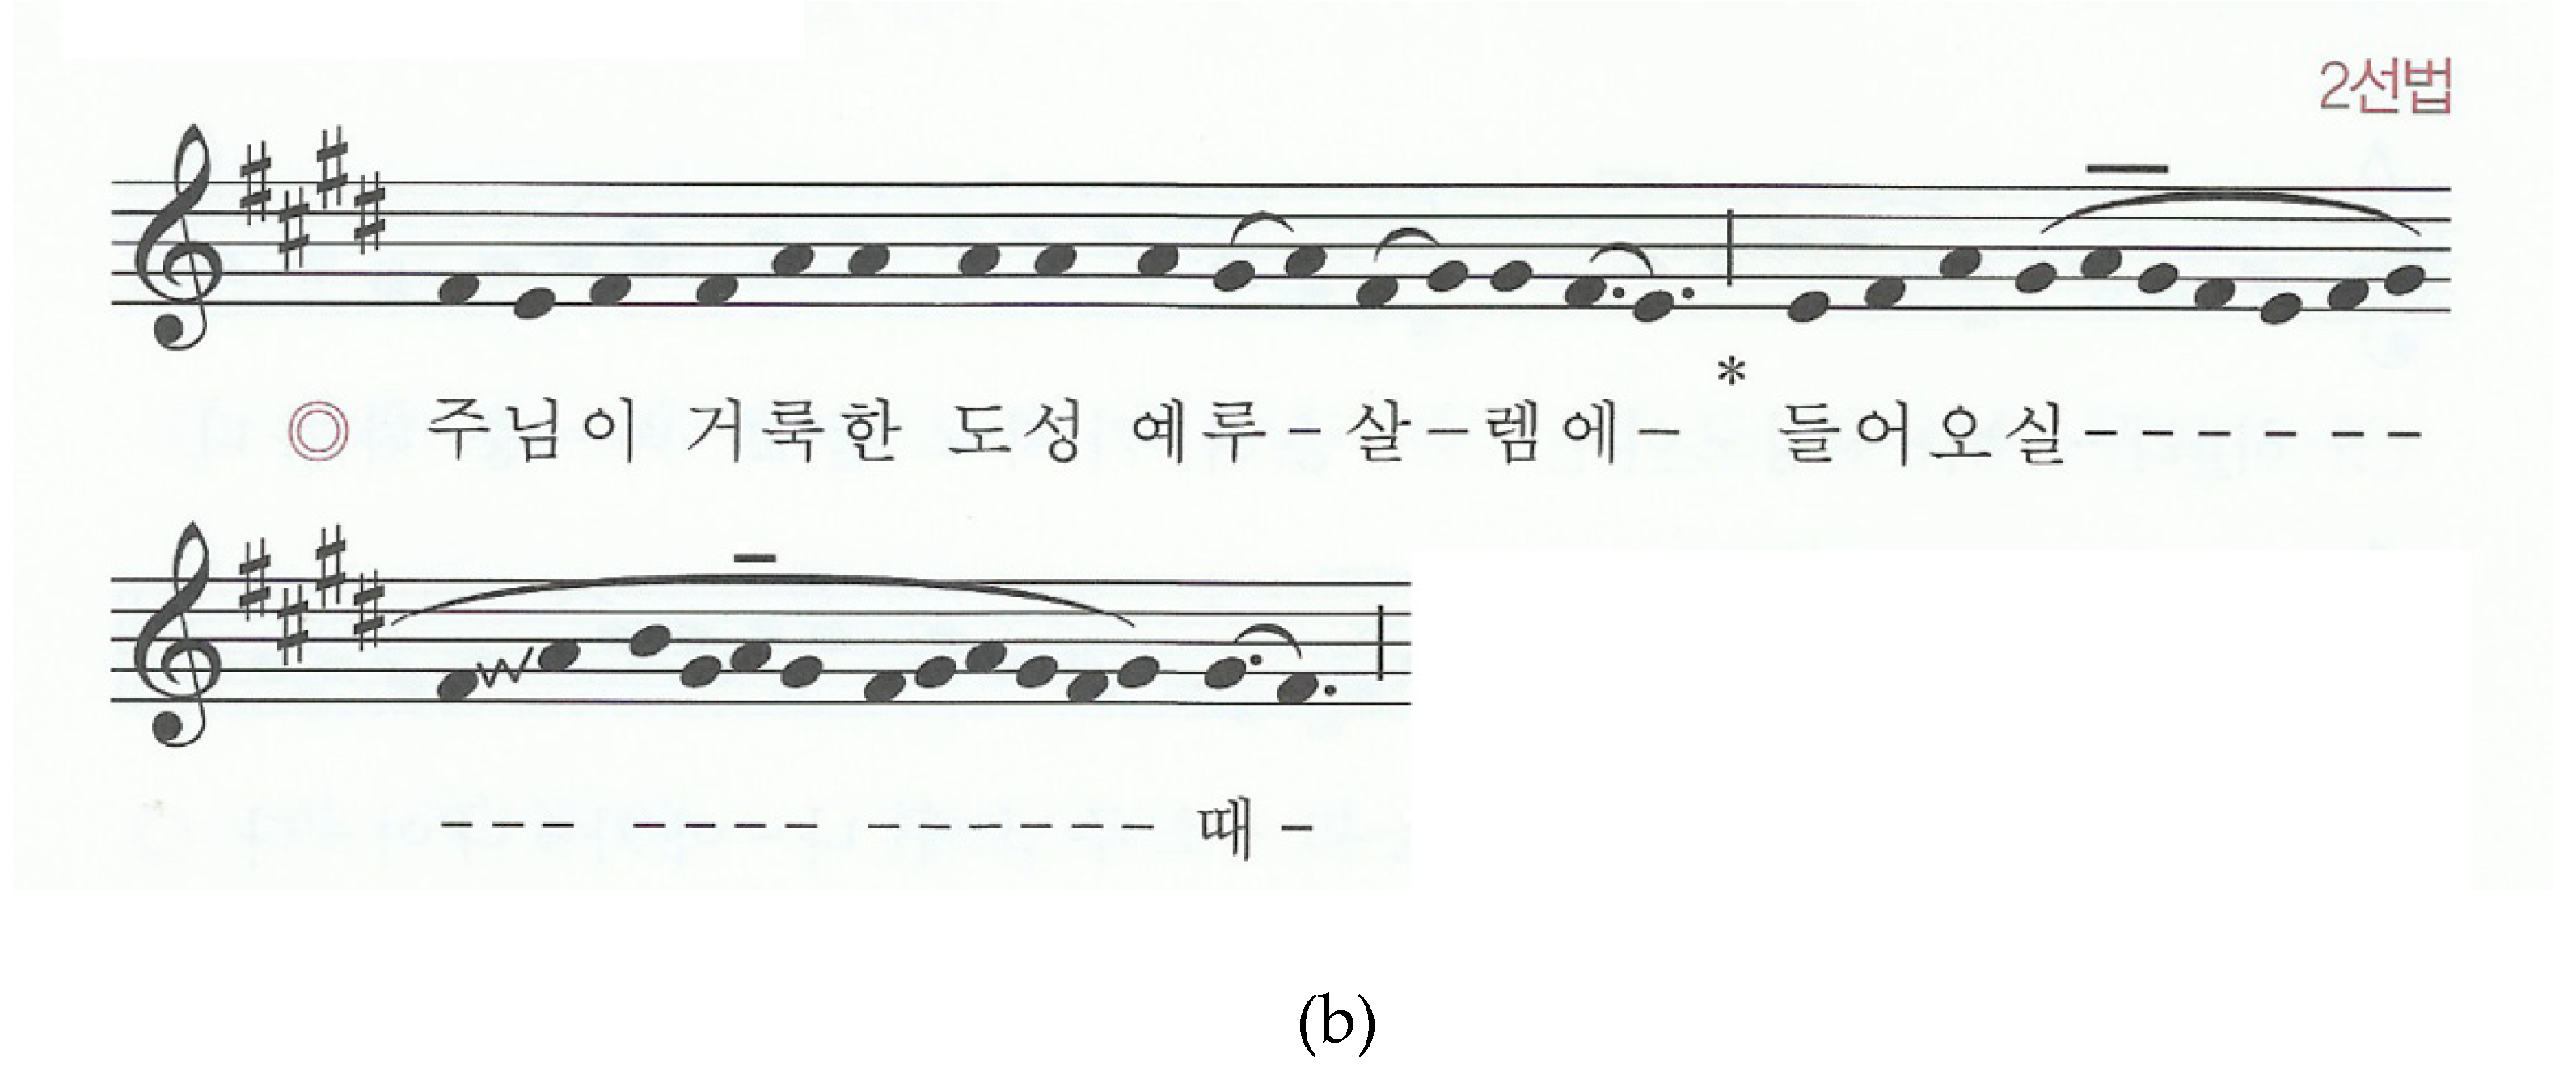 Religions Free Full-Text The Liturgical Usage of Translated Gregorian Chant in the Korean Catholic Church picture photo